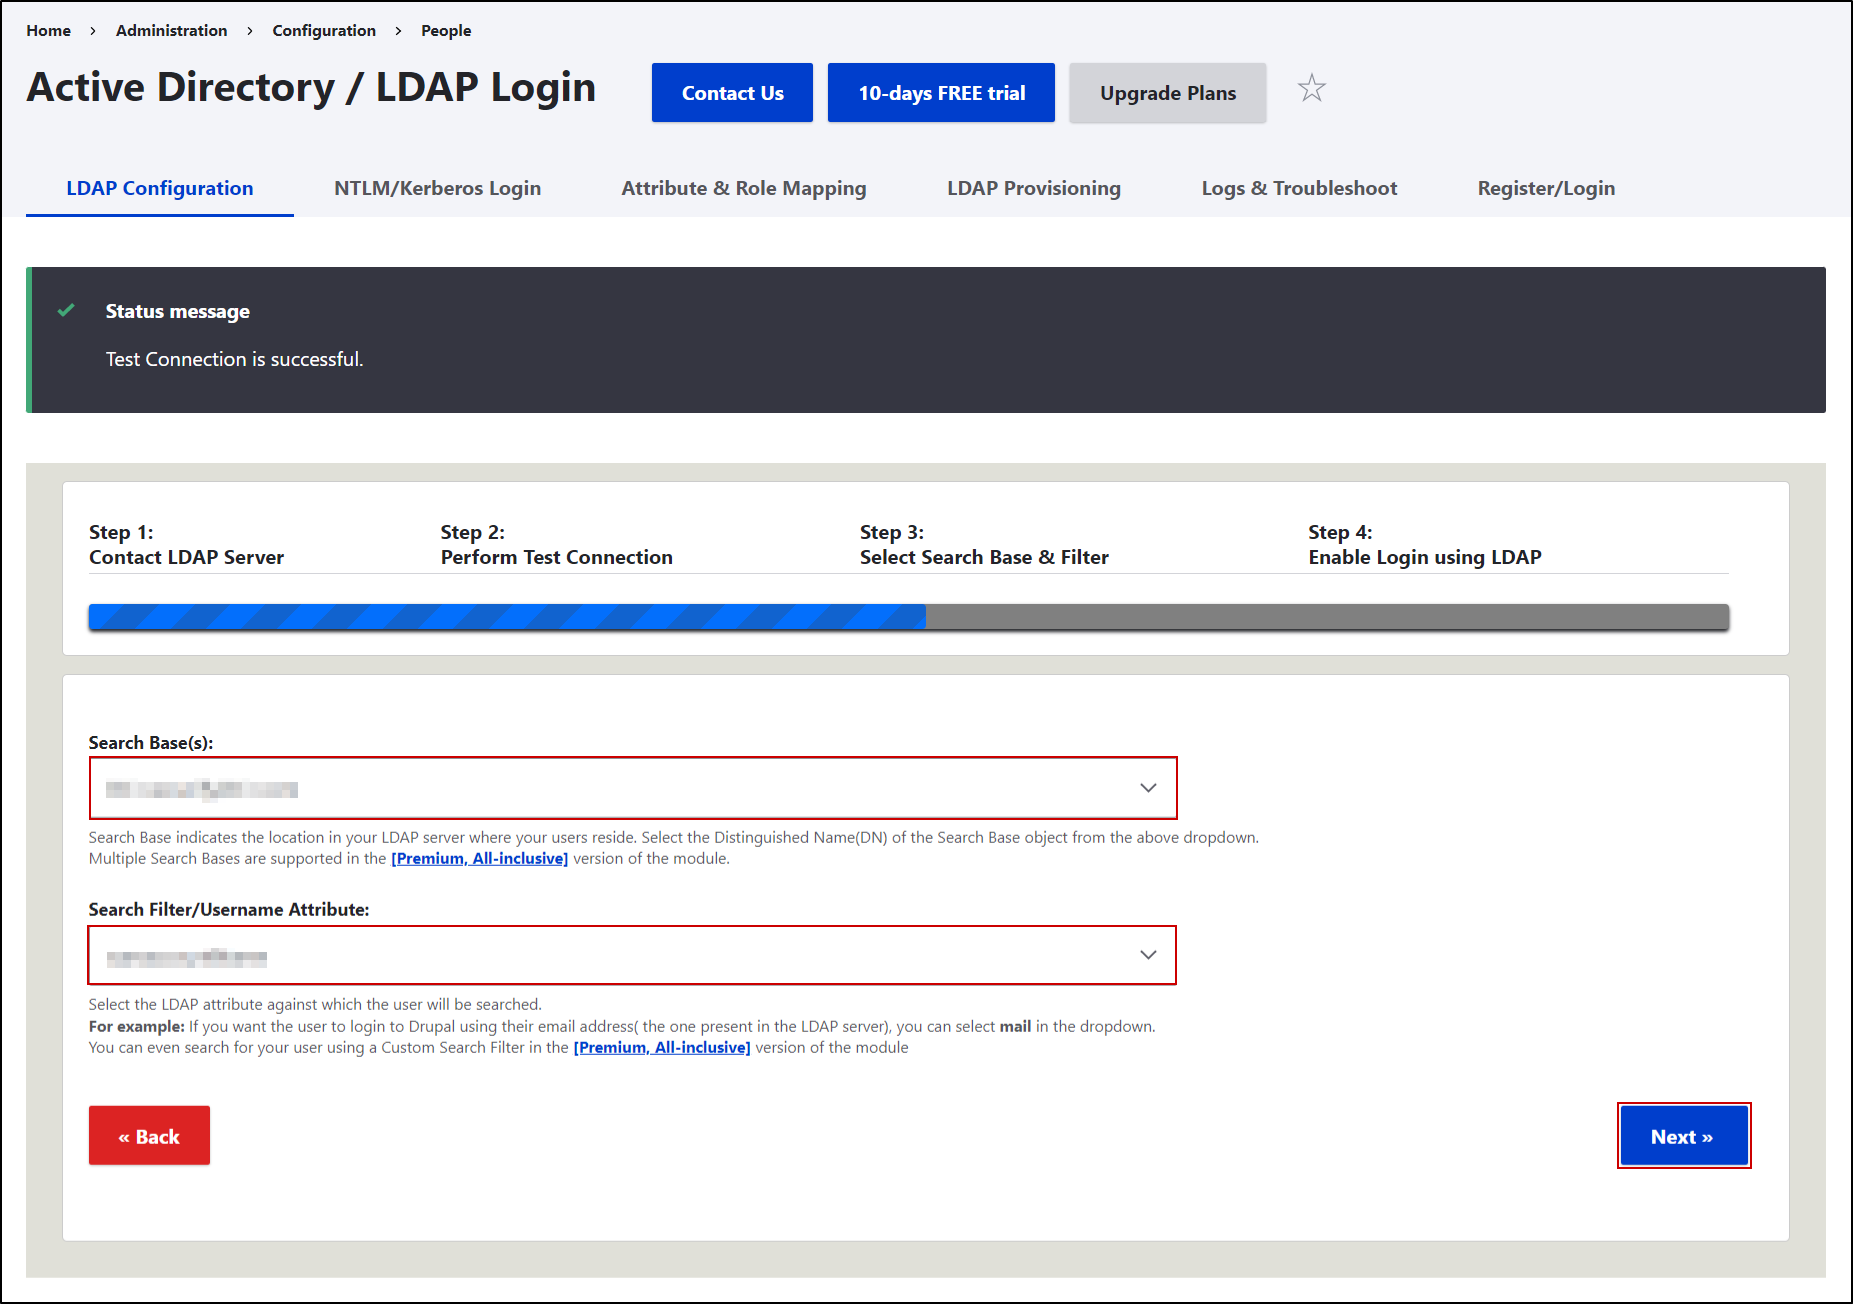  Drupal LDAP / AD search base and search filter